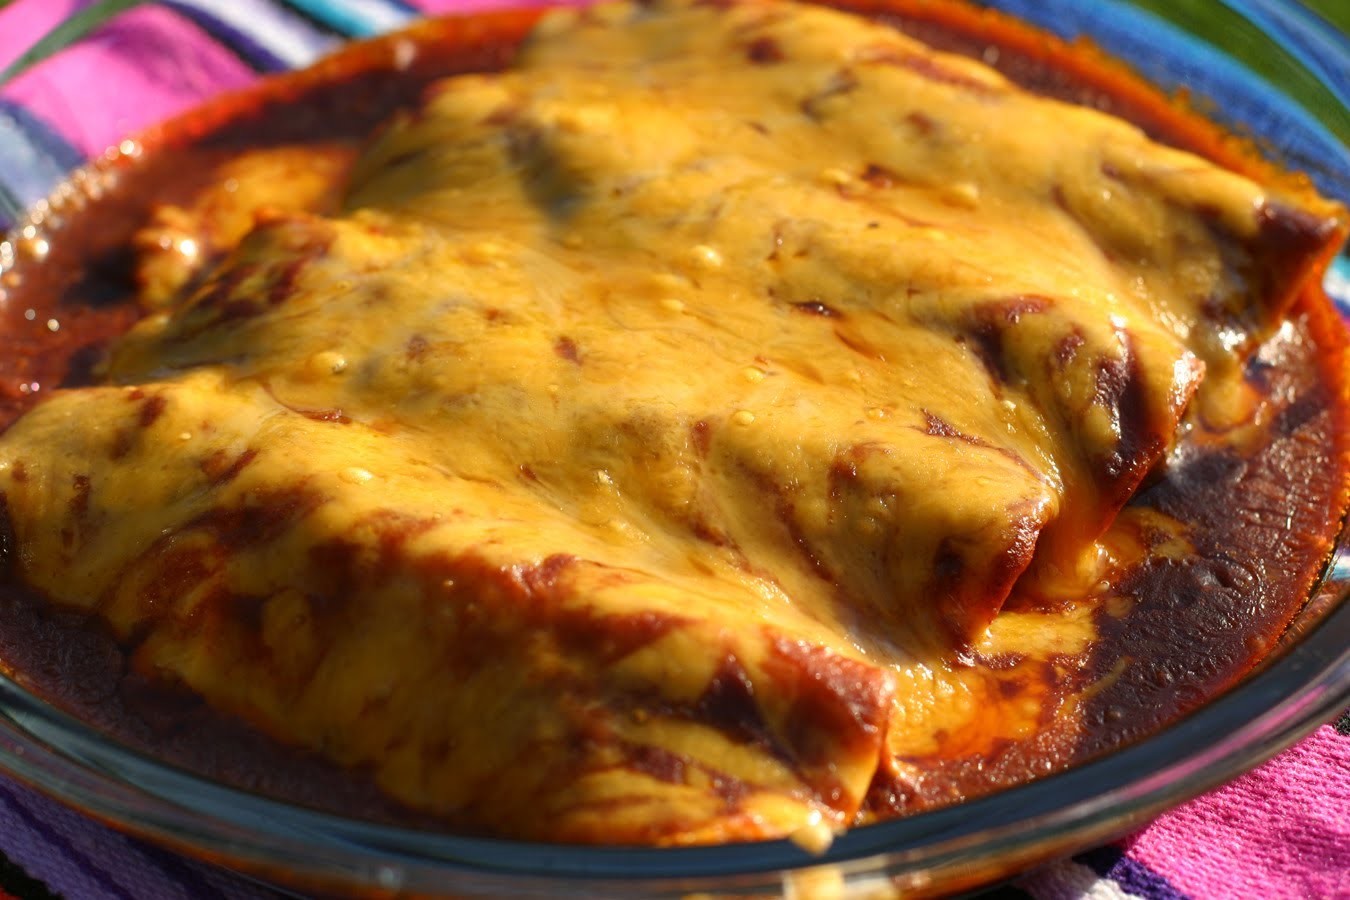 How To Make Chicken Enchiladas With Red Sauce by Rockin Robin